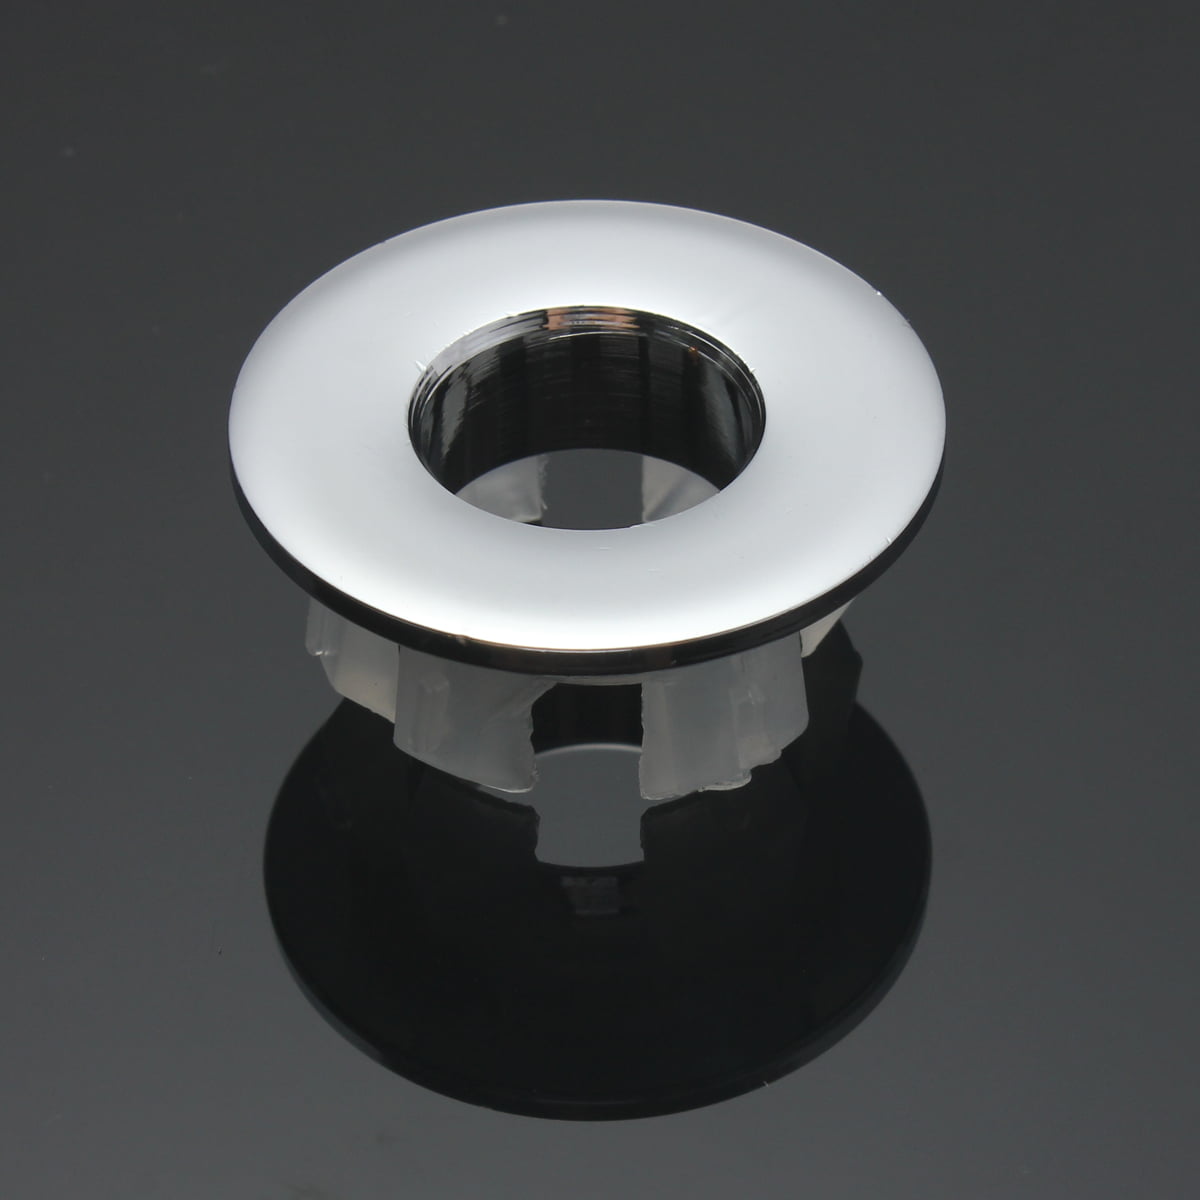 Round Overflow Cover Trim Chrome For Bathroom Basin Sink Spare Replacement @GA